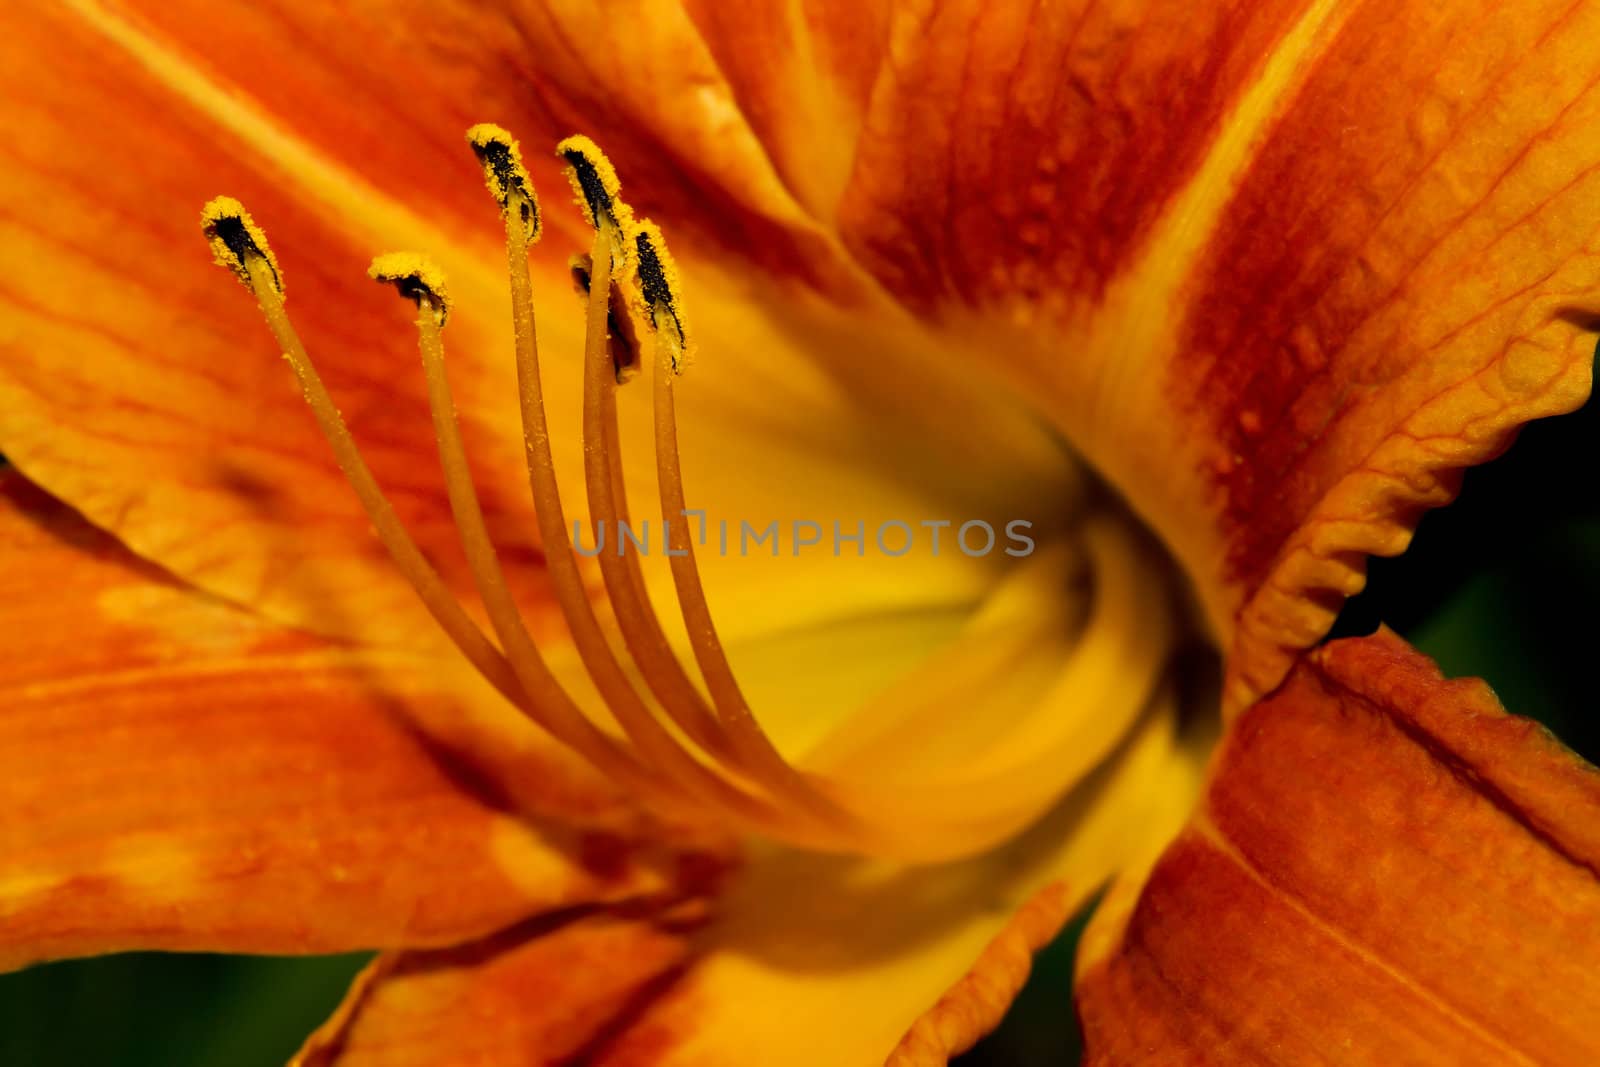 Orange Day Lily by Coffee999